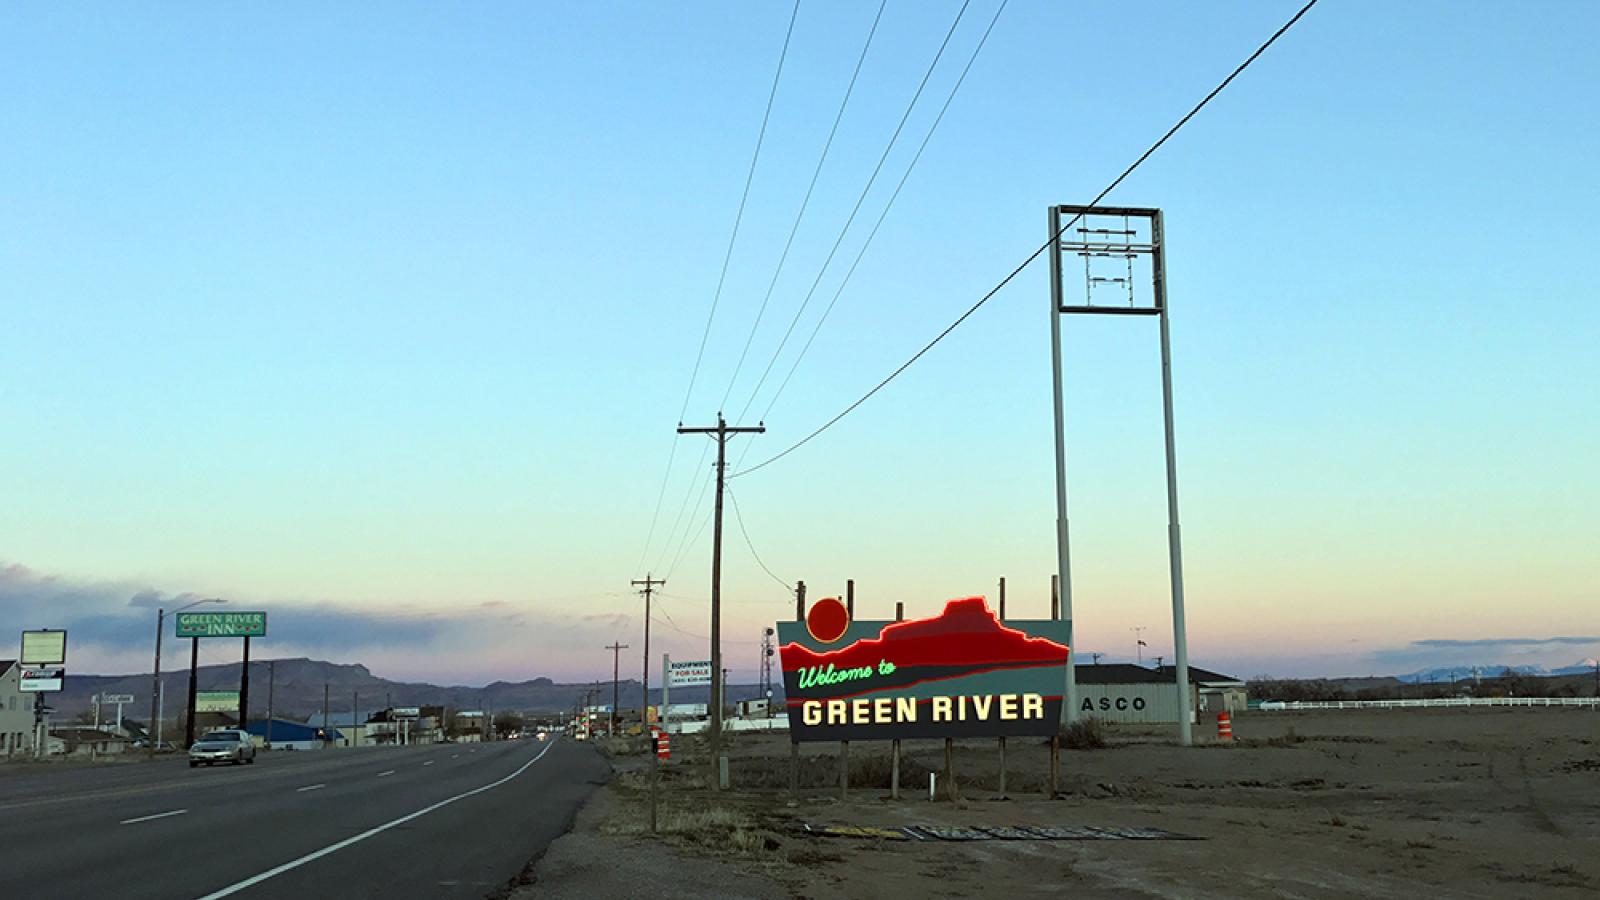 A neon sign outside the town of Green River, Utah.